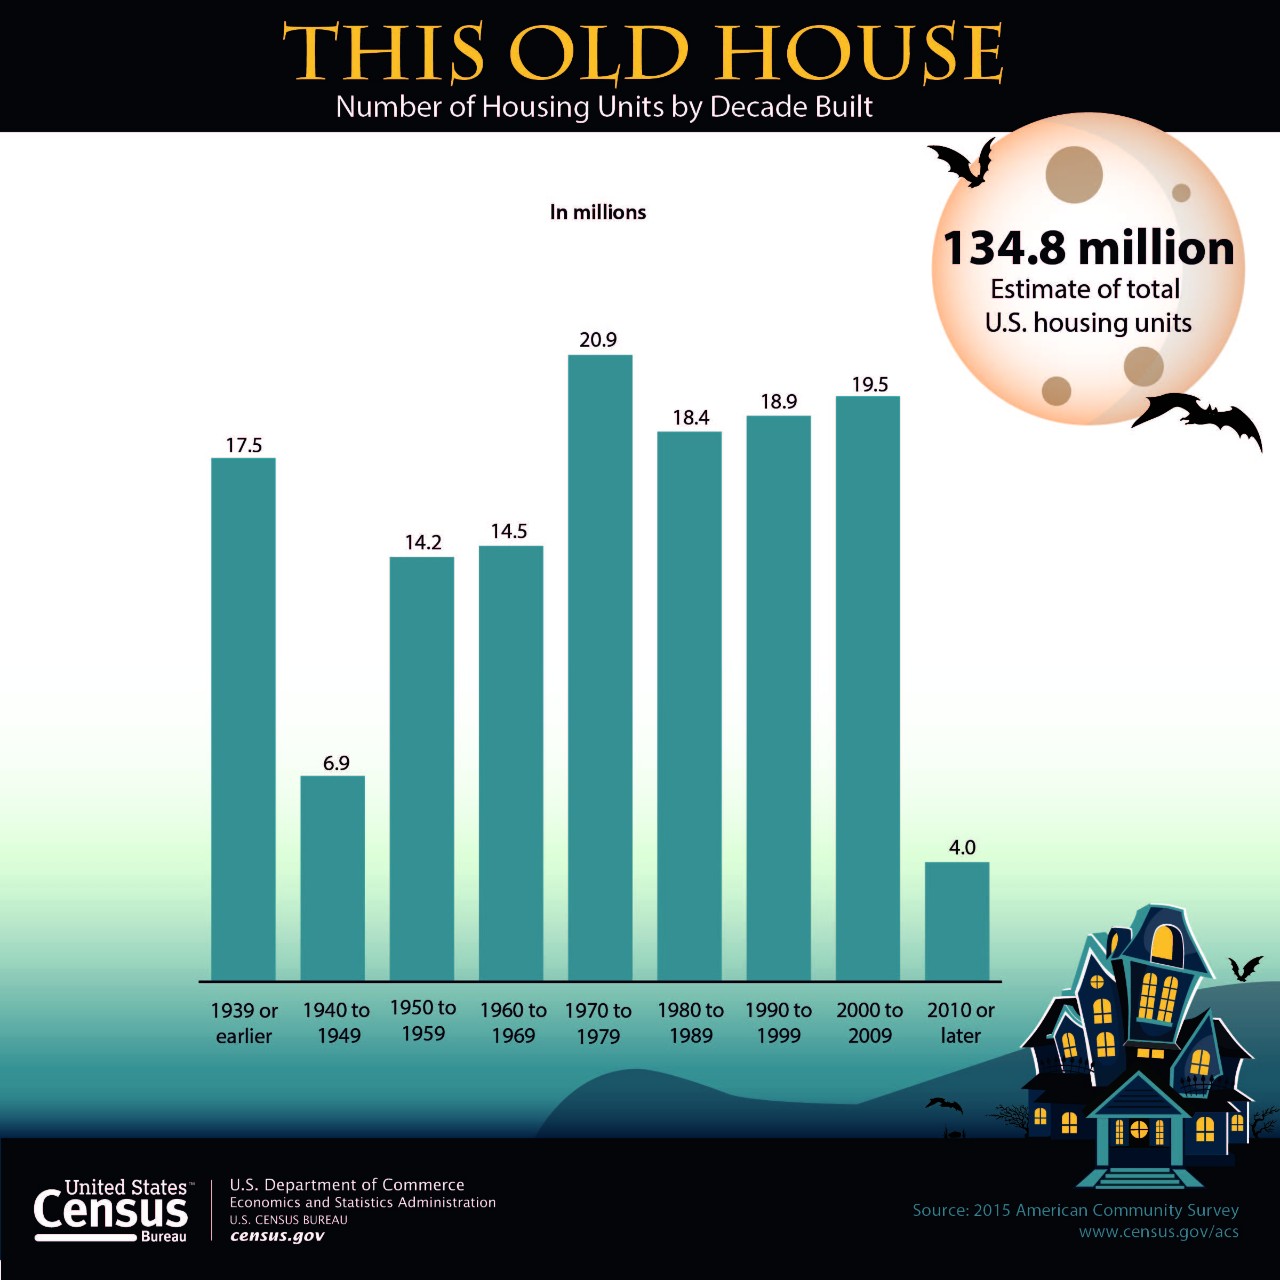 This Old House - Number of Housing Units by Decade Built